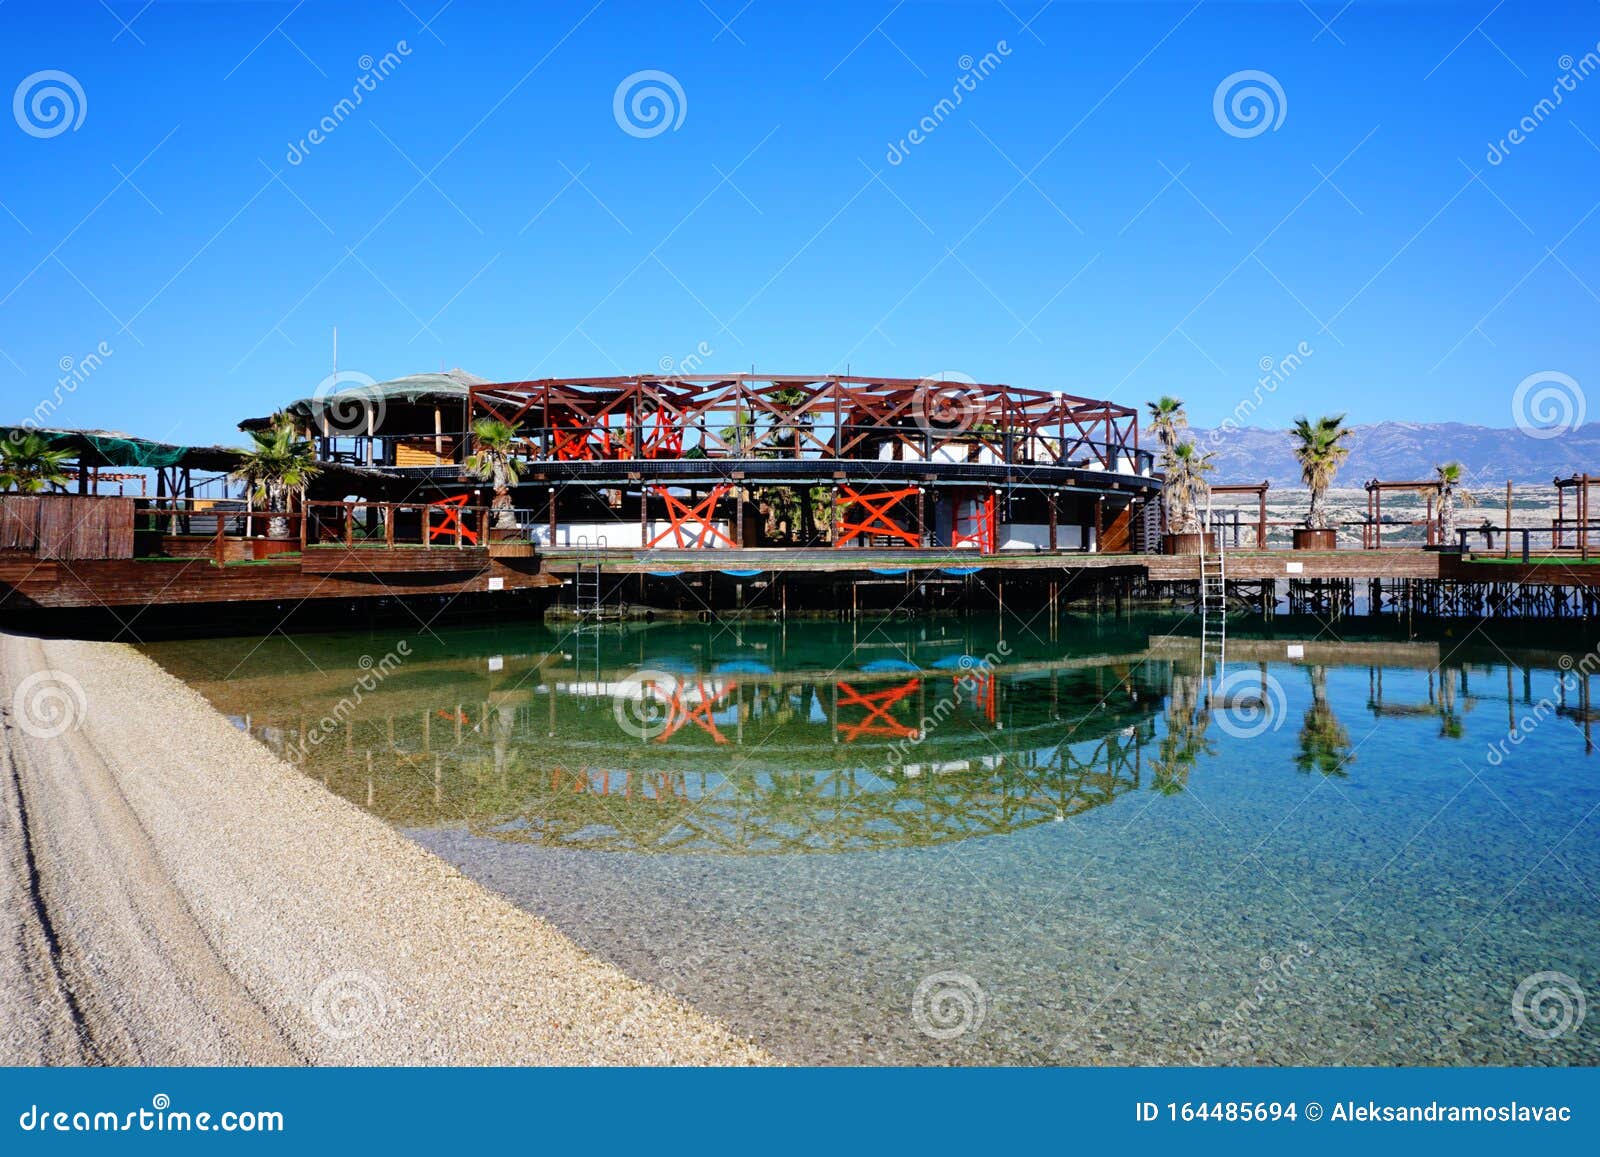 Zrce Beach And Empty Noa Club On The Beach Without Tourist And Dancers Editorial Stock Image Image Of Blue Editorial 164485694